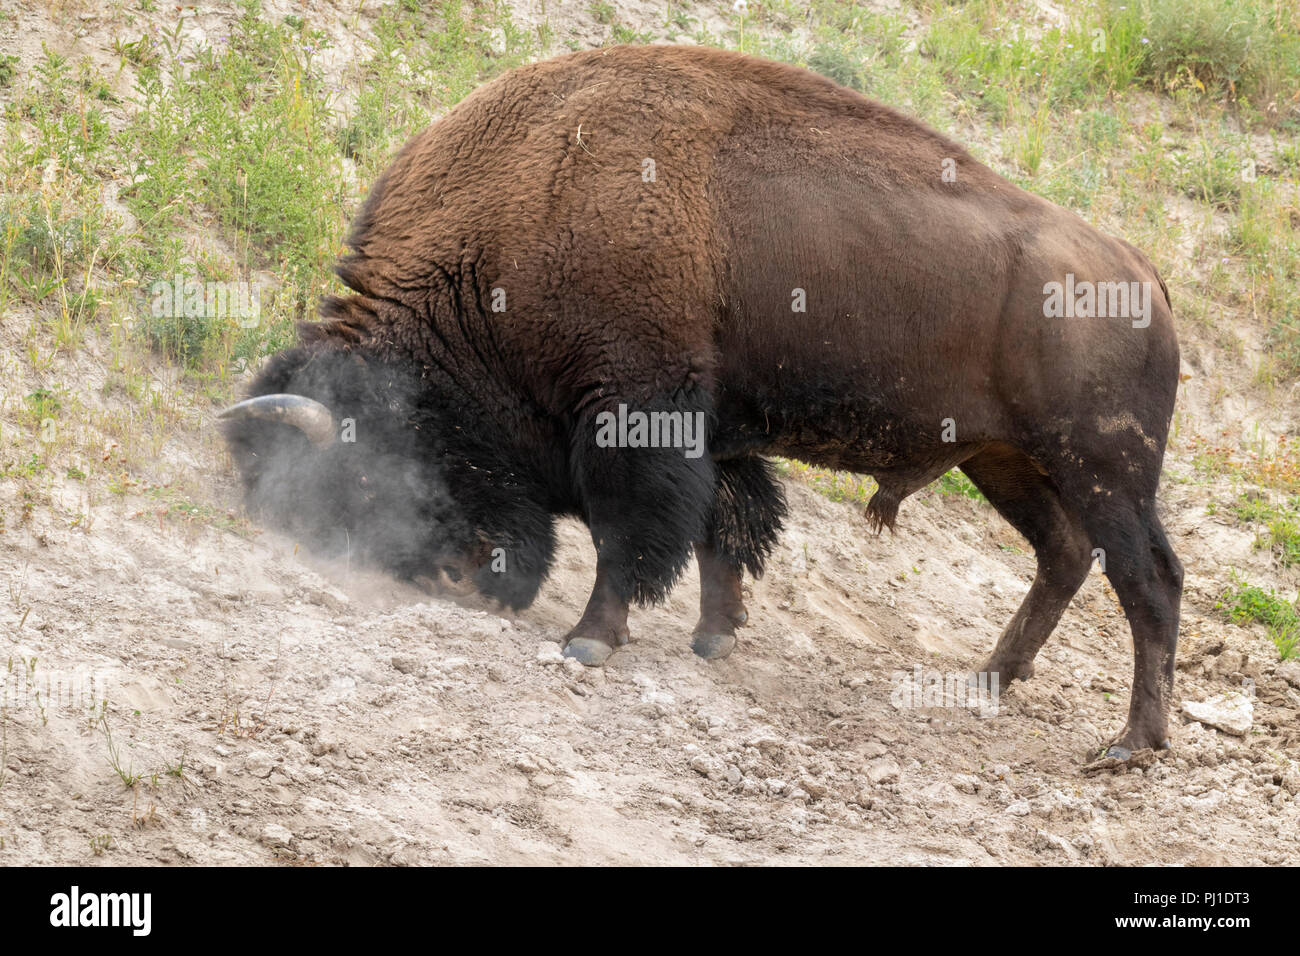 American bison (Bison bison) male rubbing head on ground, Yellowstone National park, Wyoming, USA. Stock Photo